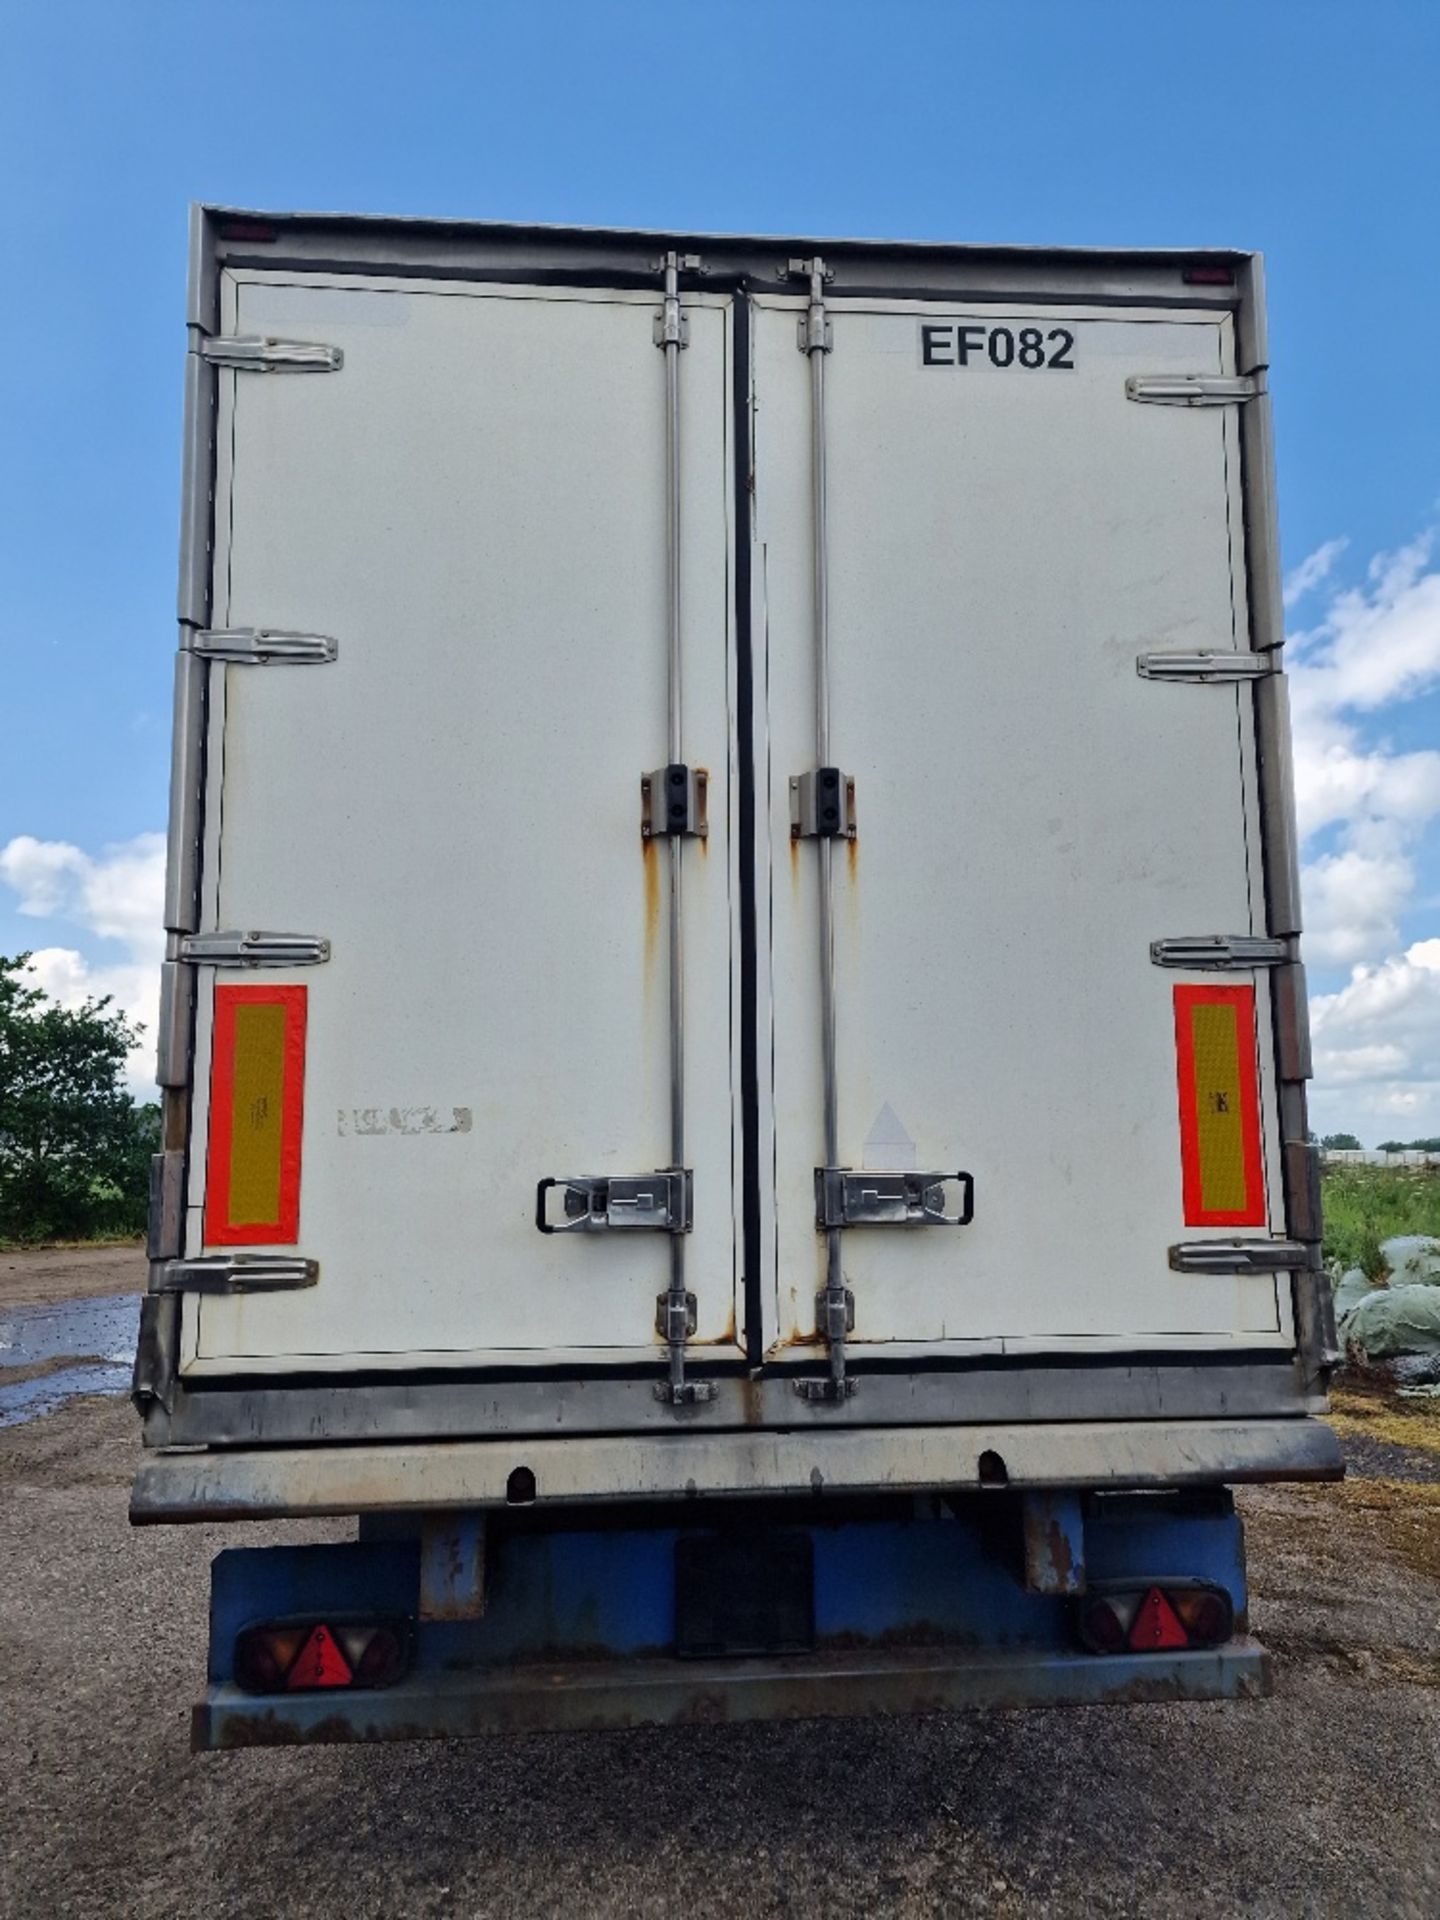 EF082 – 2009 Montracon 13.6m Refrigerated Trailer - Image 6 of 9